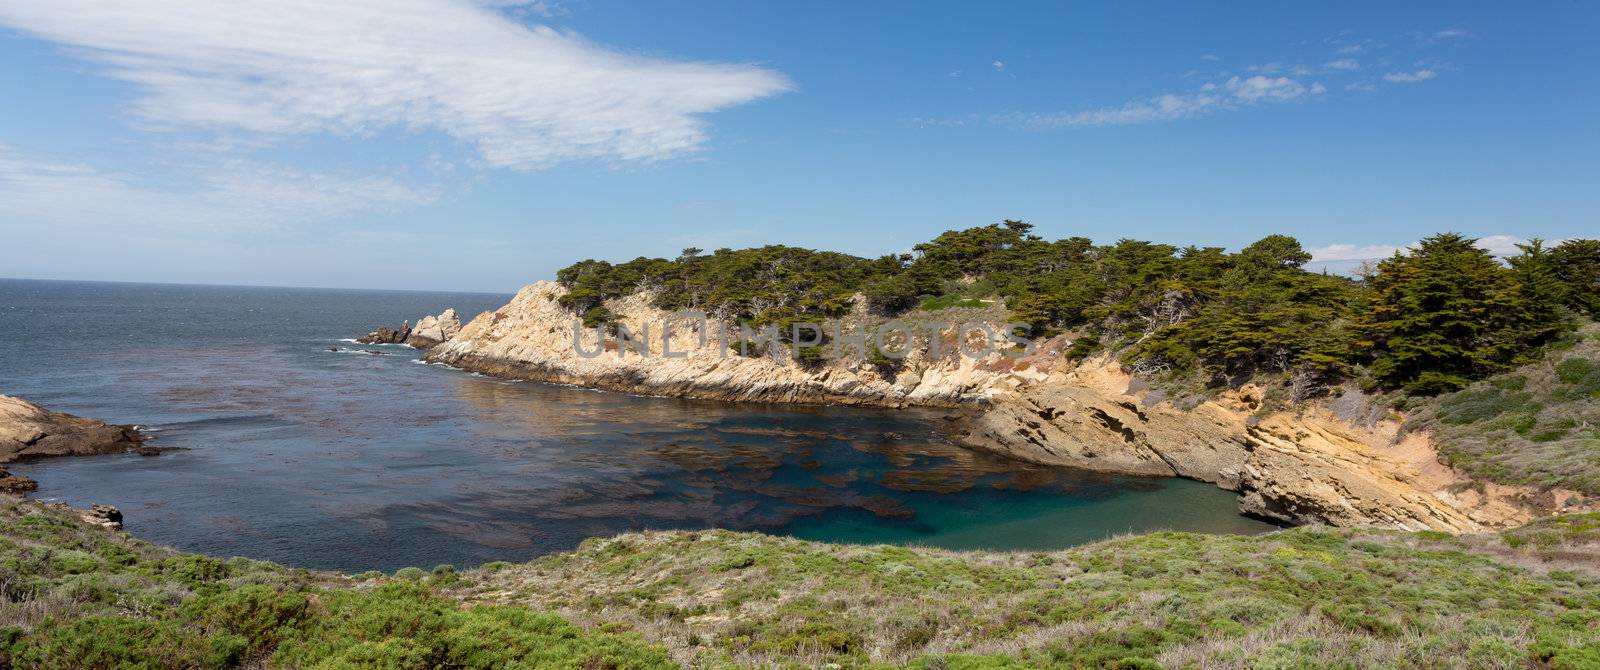 Spectacular Panormamic  Rock Formations at Point Lobos State Natural Reserve